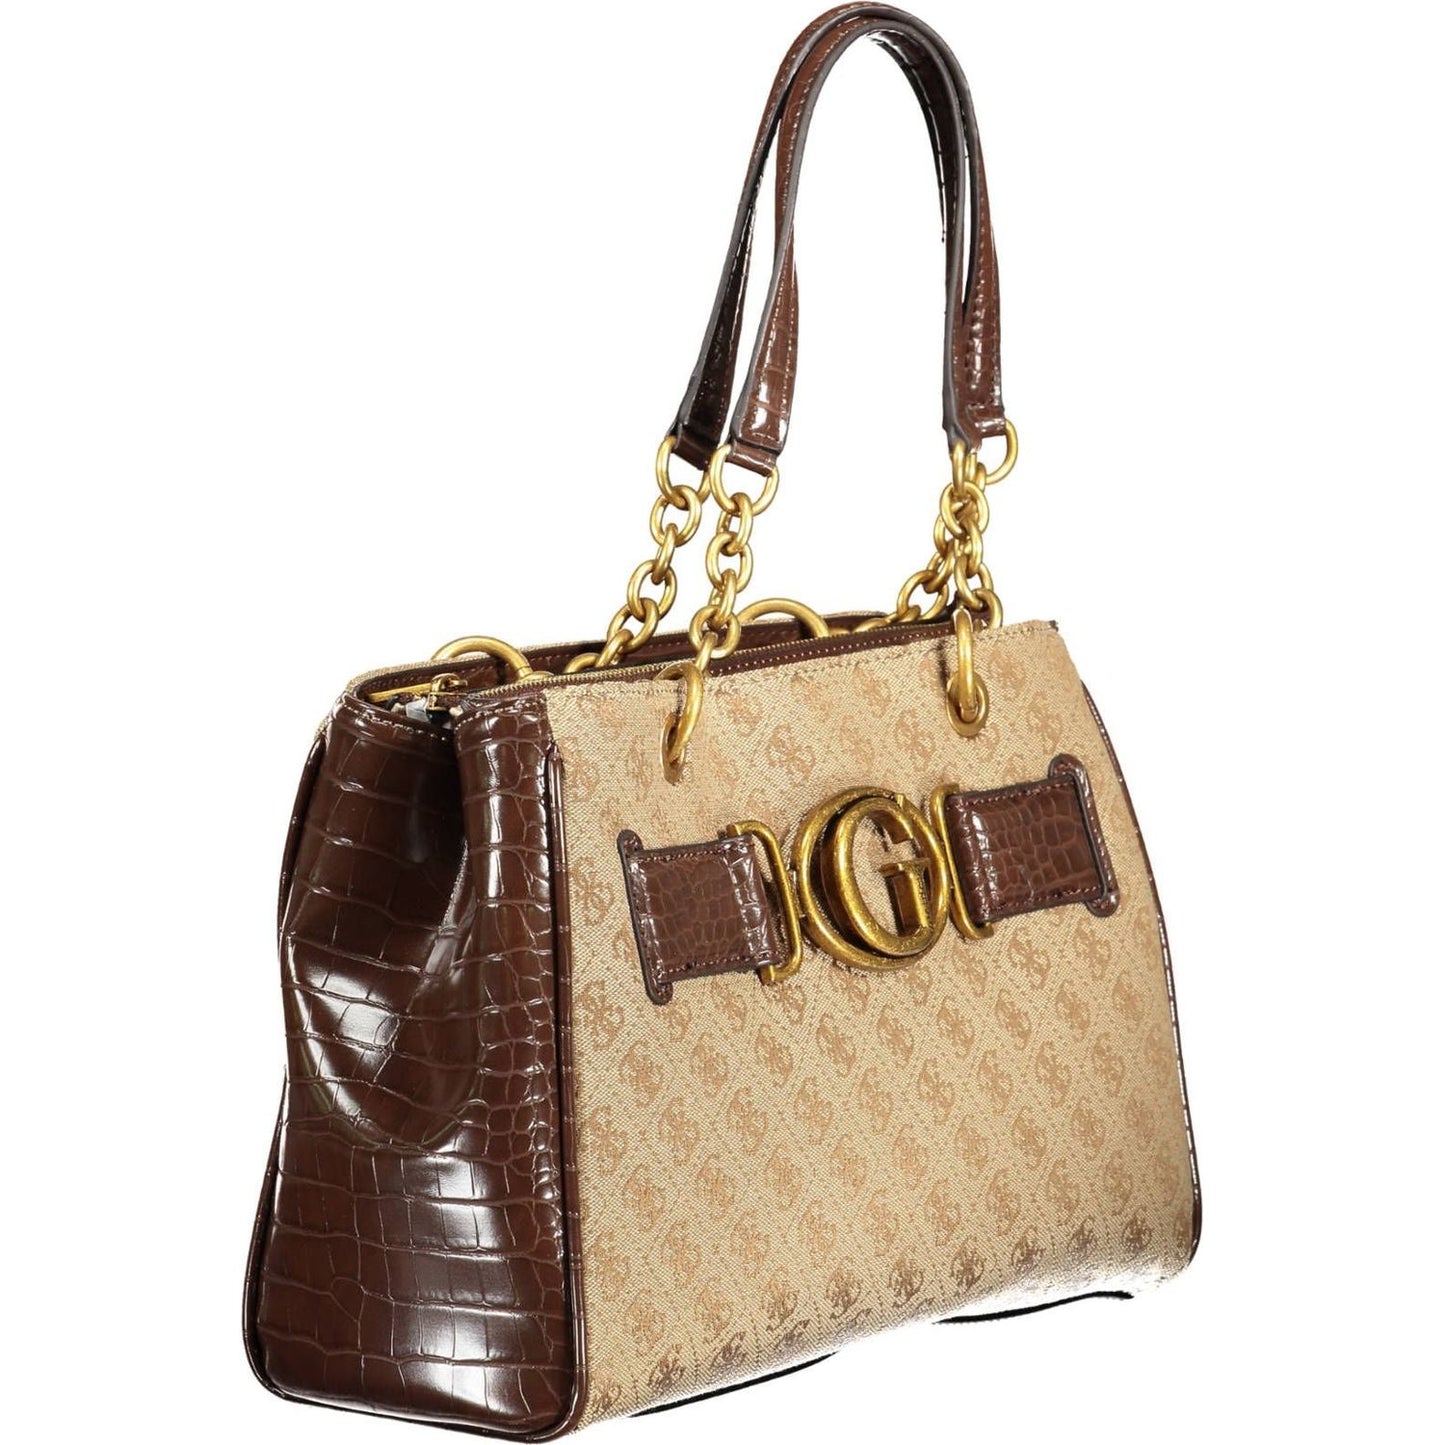 Guess Jeans Chic Brown Chain-Handle Shoulder Bag chic-brown-chain-handle-shoulder-bag